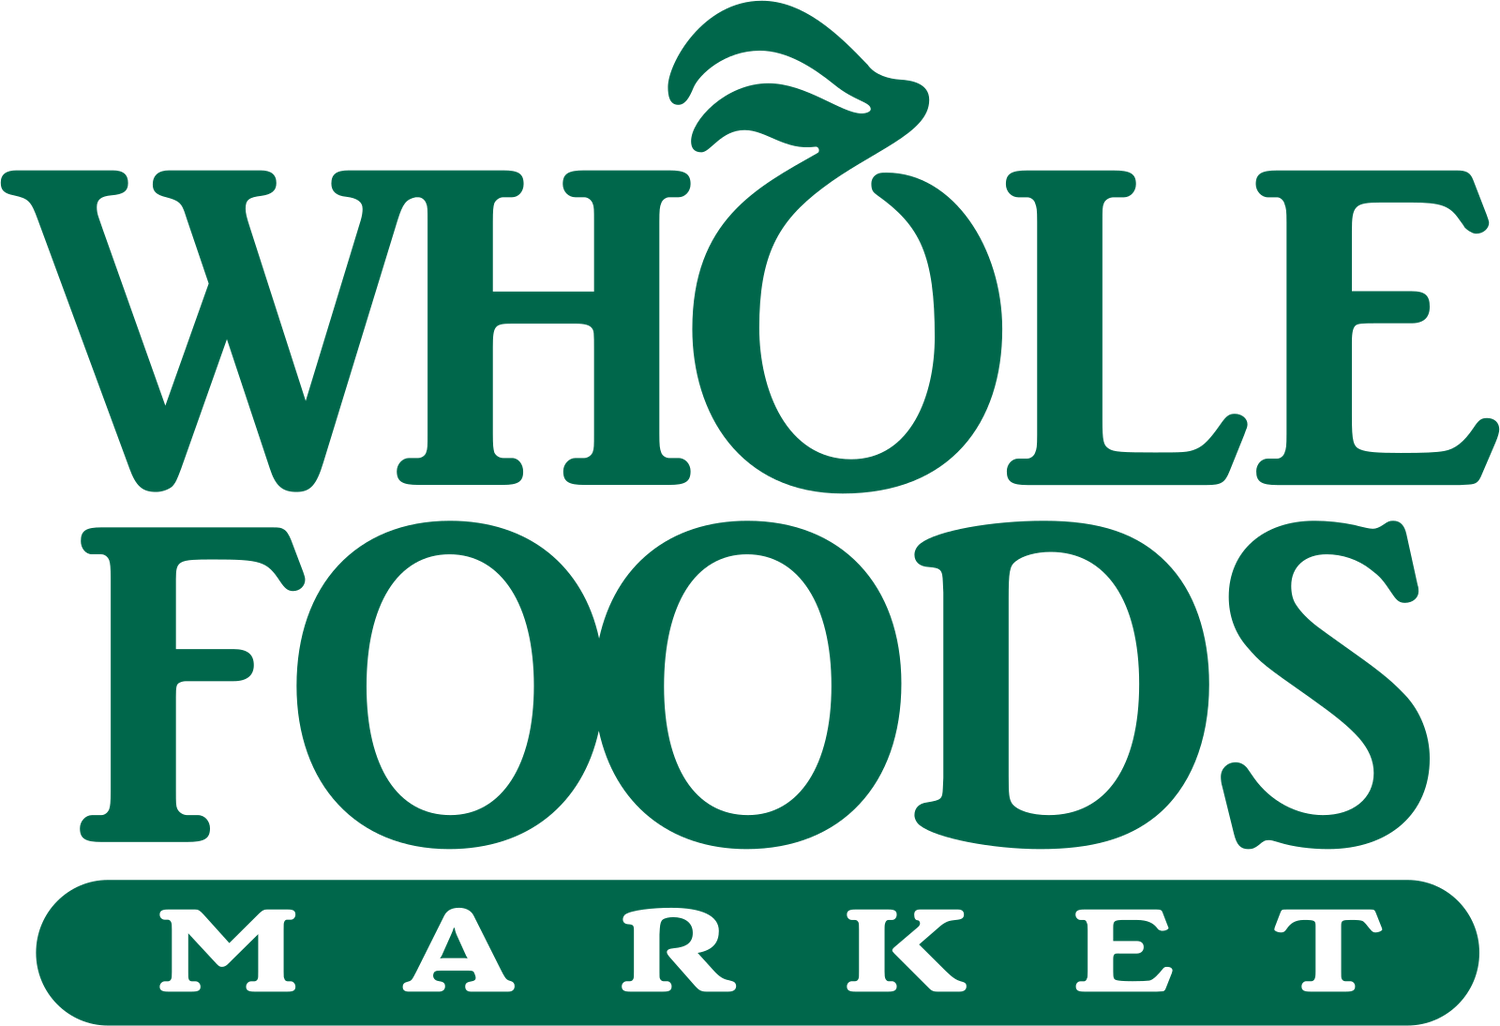 Nunc is now available in Wholefoods Market stores throughout London